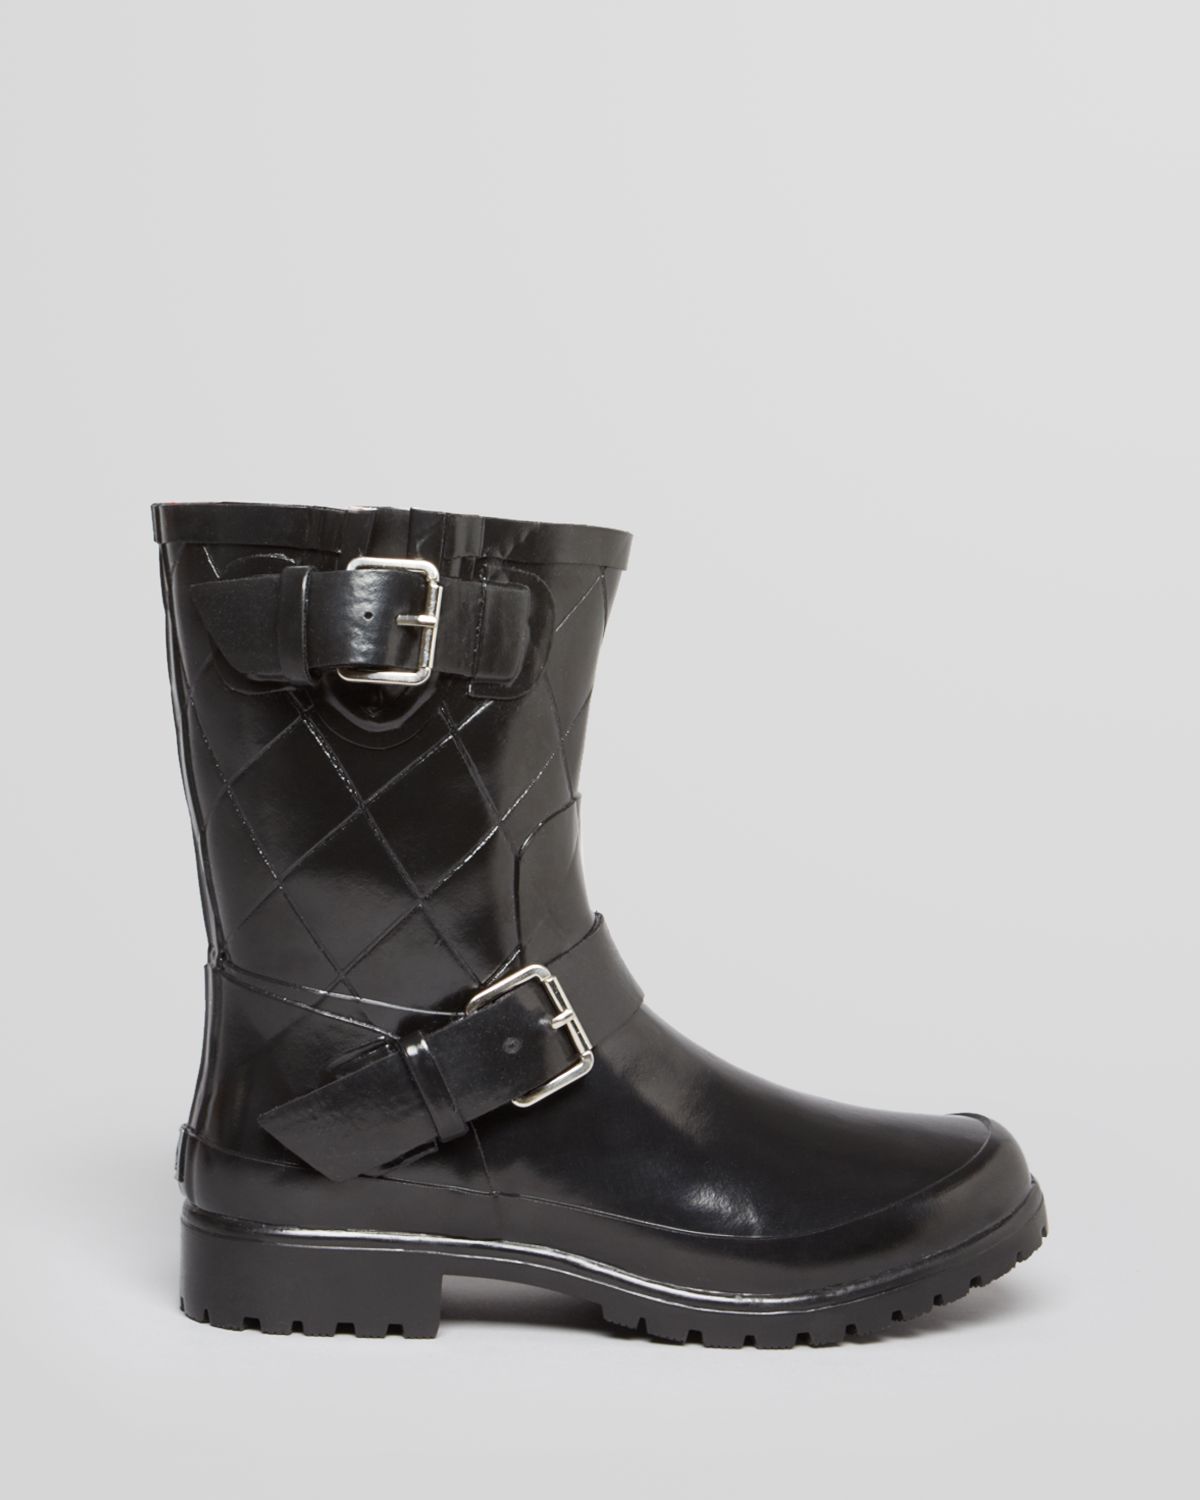 Sperry Top-Sider Moto Rain Boots Falcon Quilted in Black - Lyst